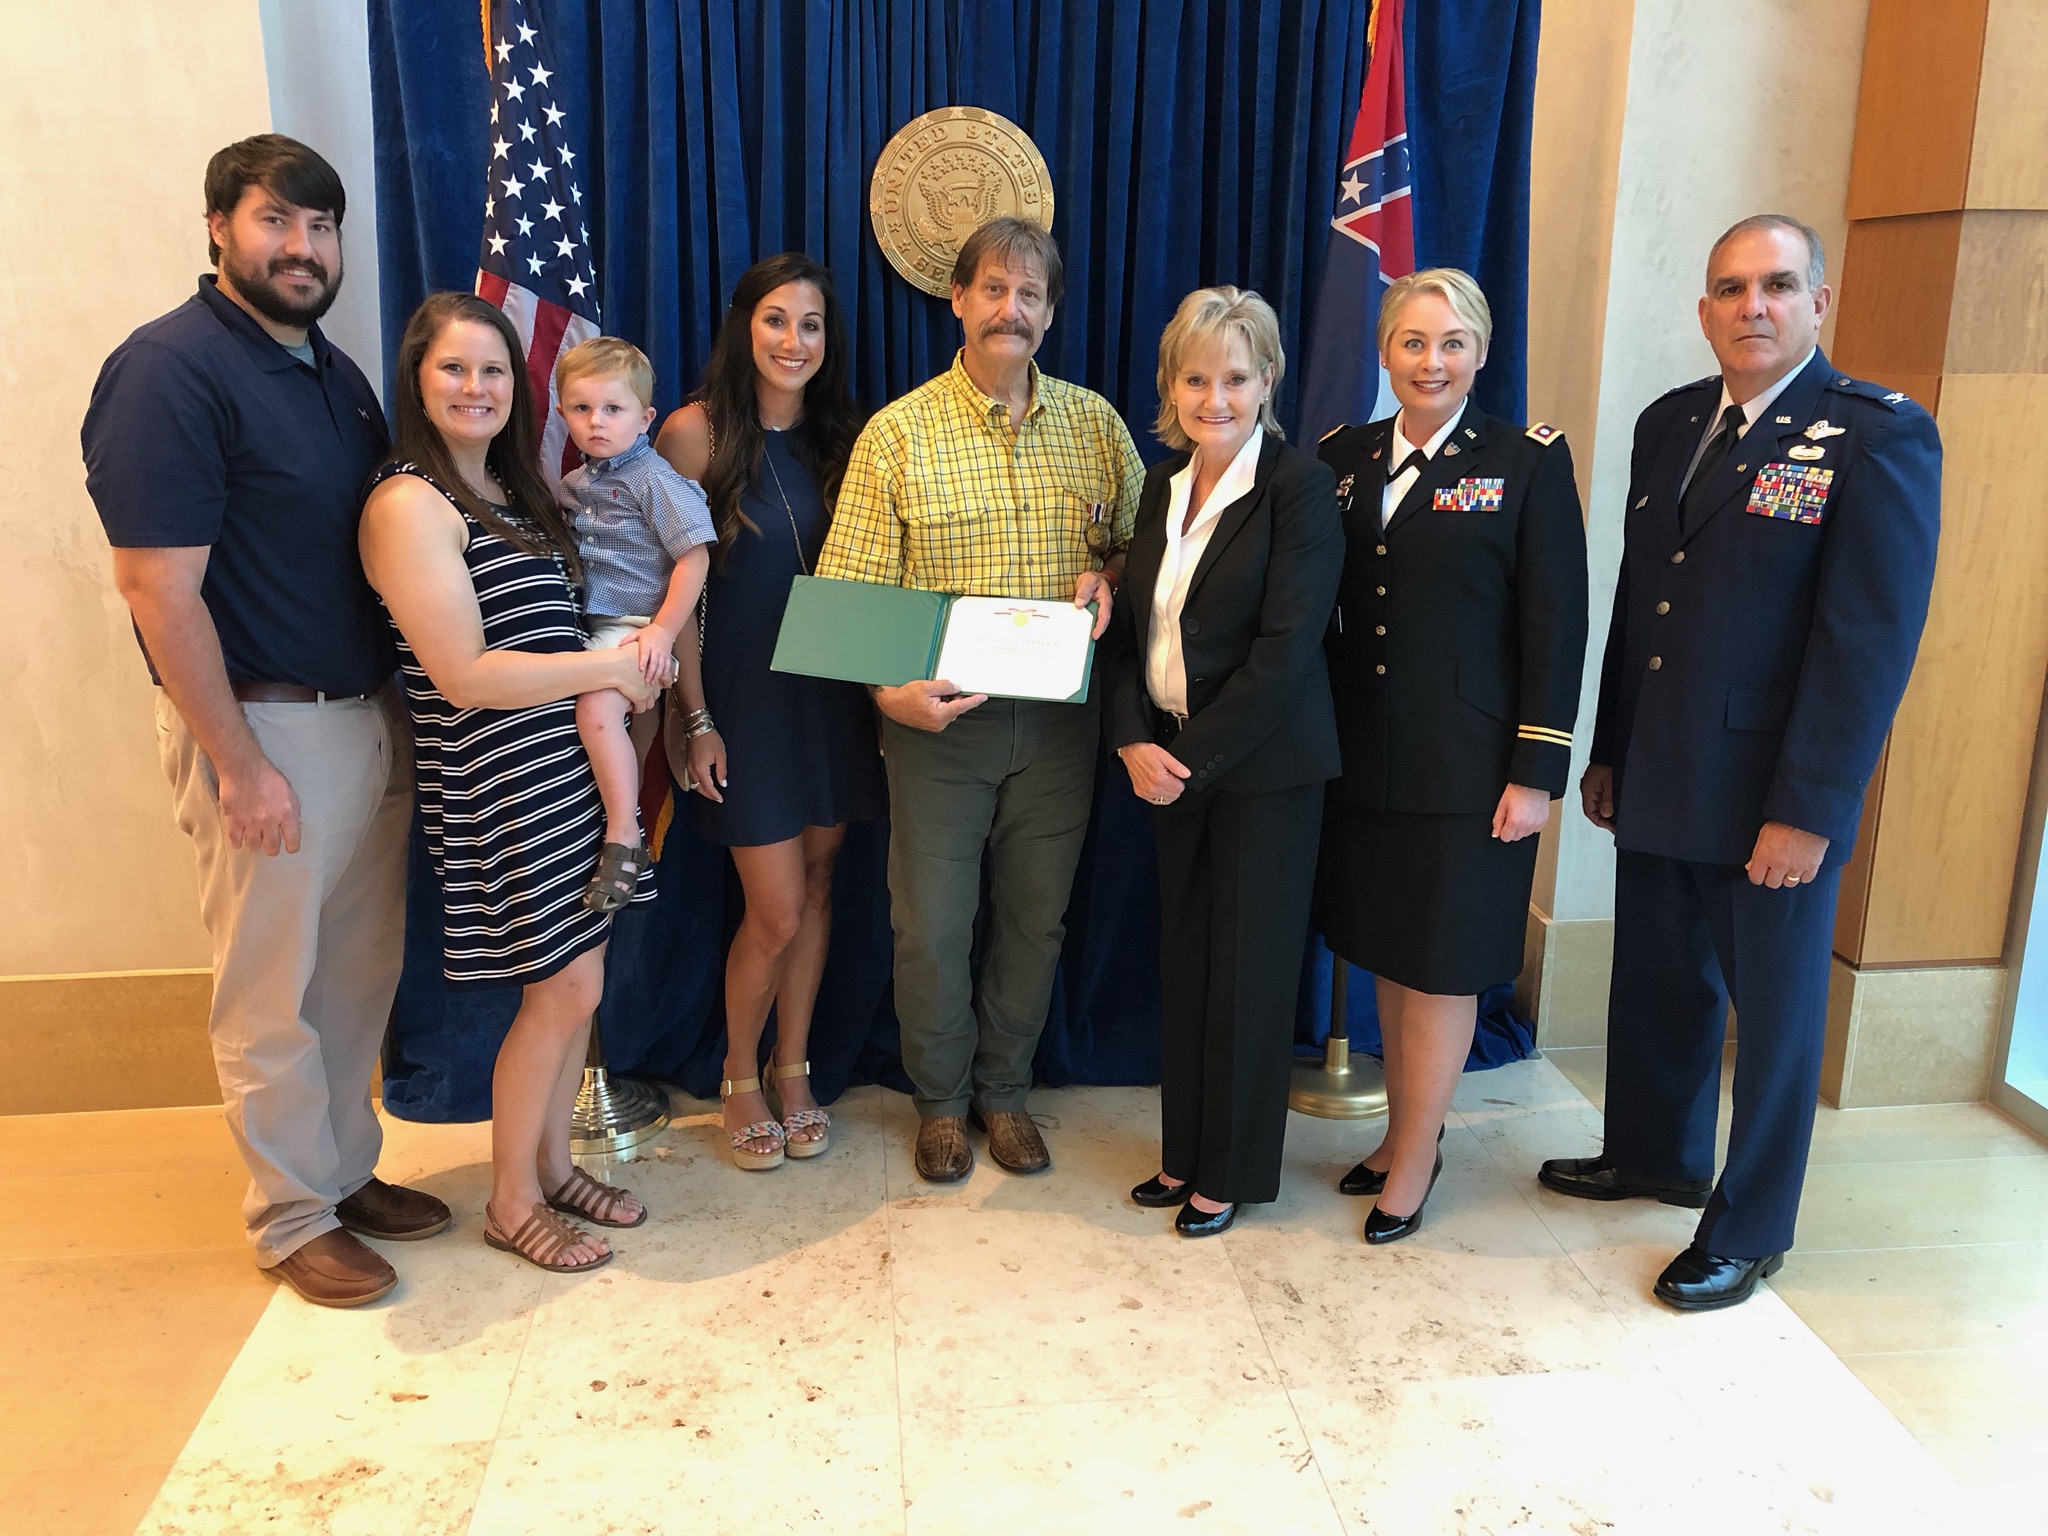 Jay Blount and Family - Defense of Freedom Medal 